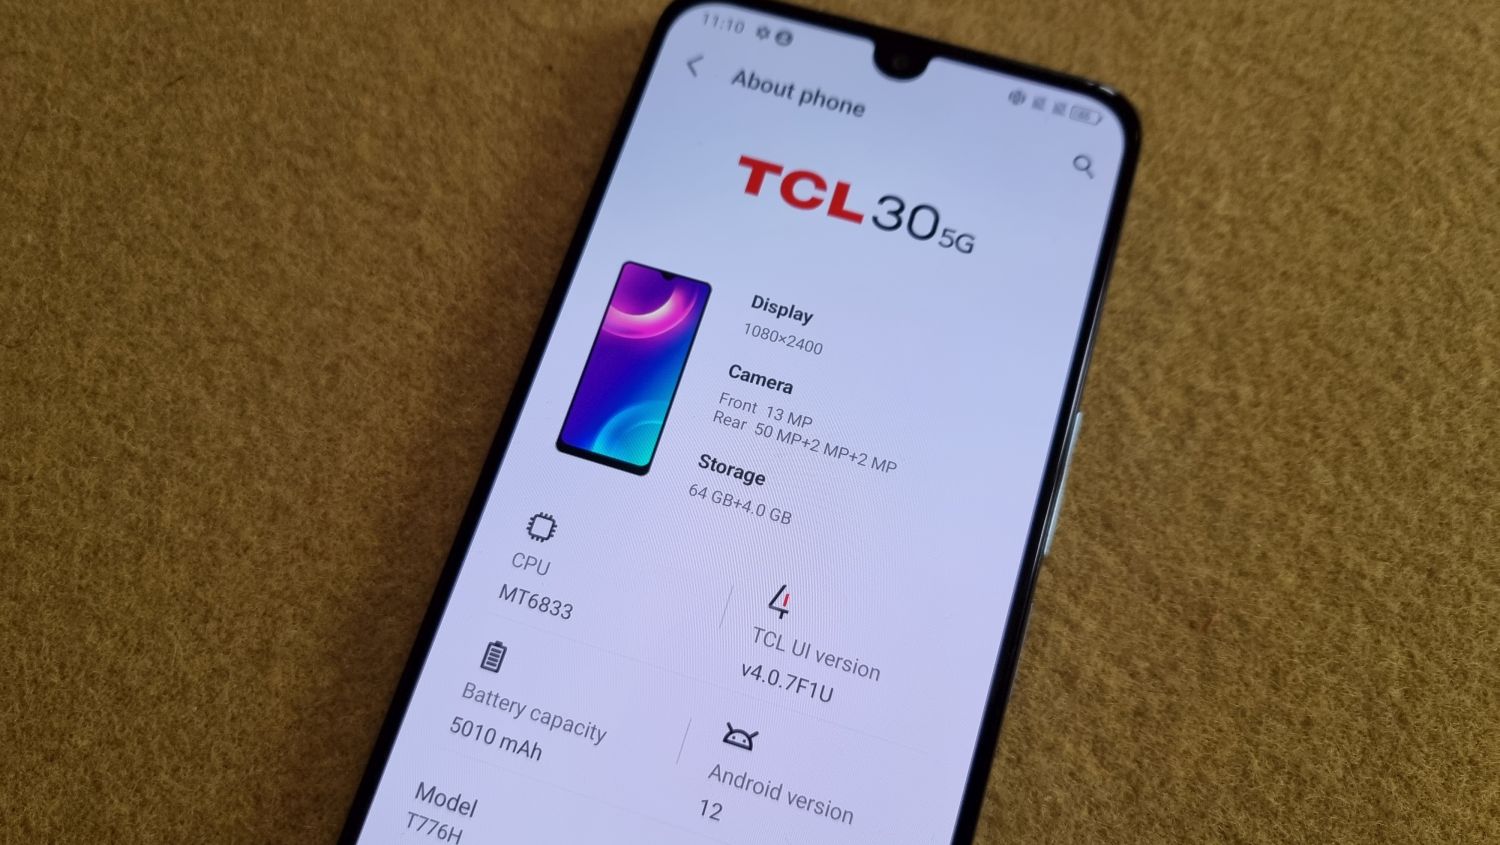 TCL 30 5G 4